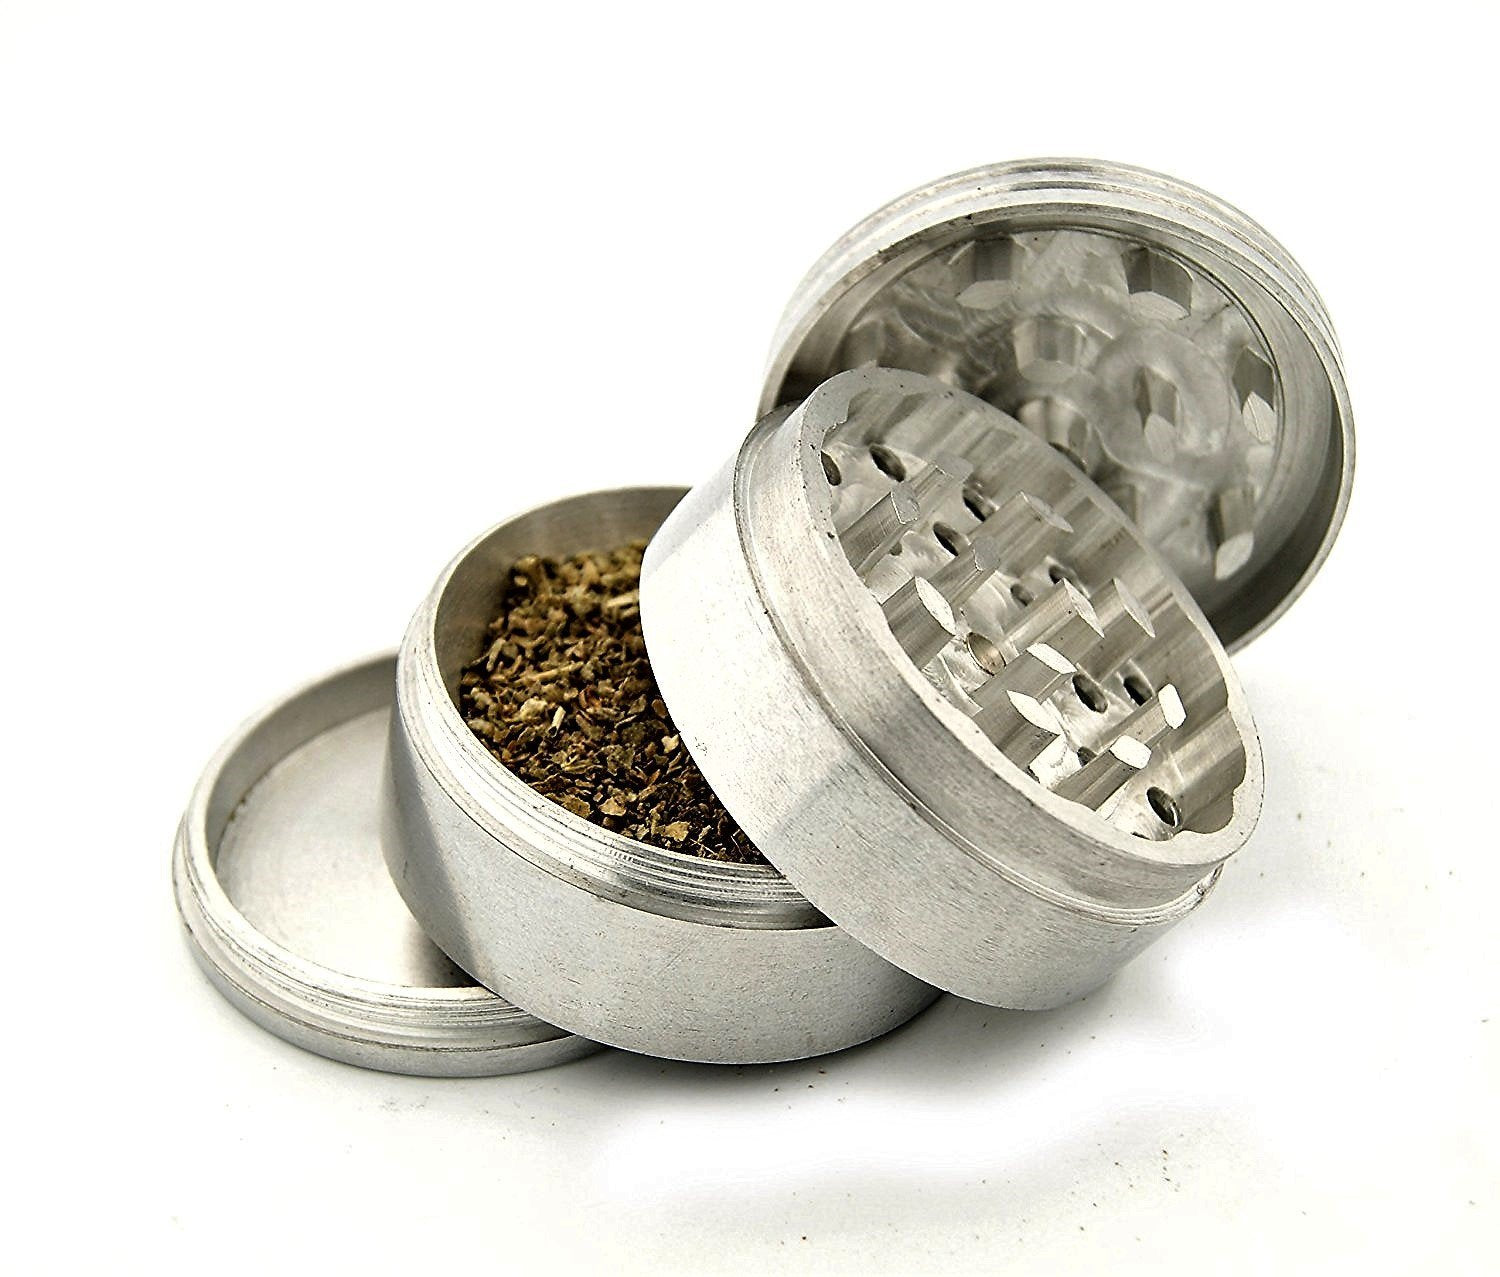 Buy Outontrip Classic Metallic Herb Crusher/Grinder Large with filter (Herb  grinder/herb crusher 52 mm) Online at Low Prices in India 